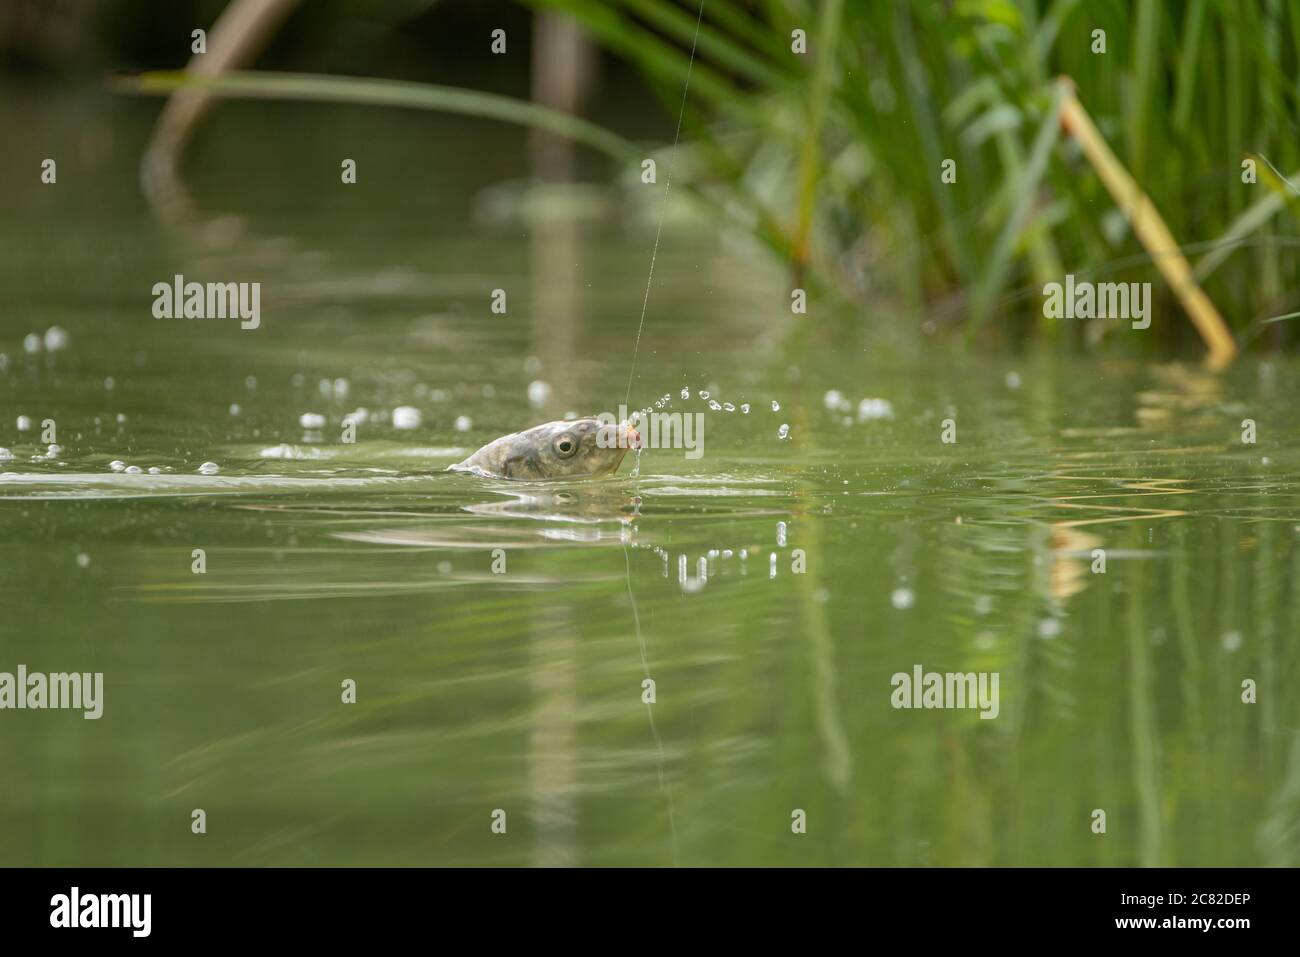 A fresh water carp caught on a fishing line on a lake in the UK. Stock Photo